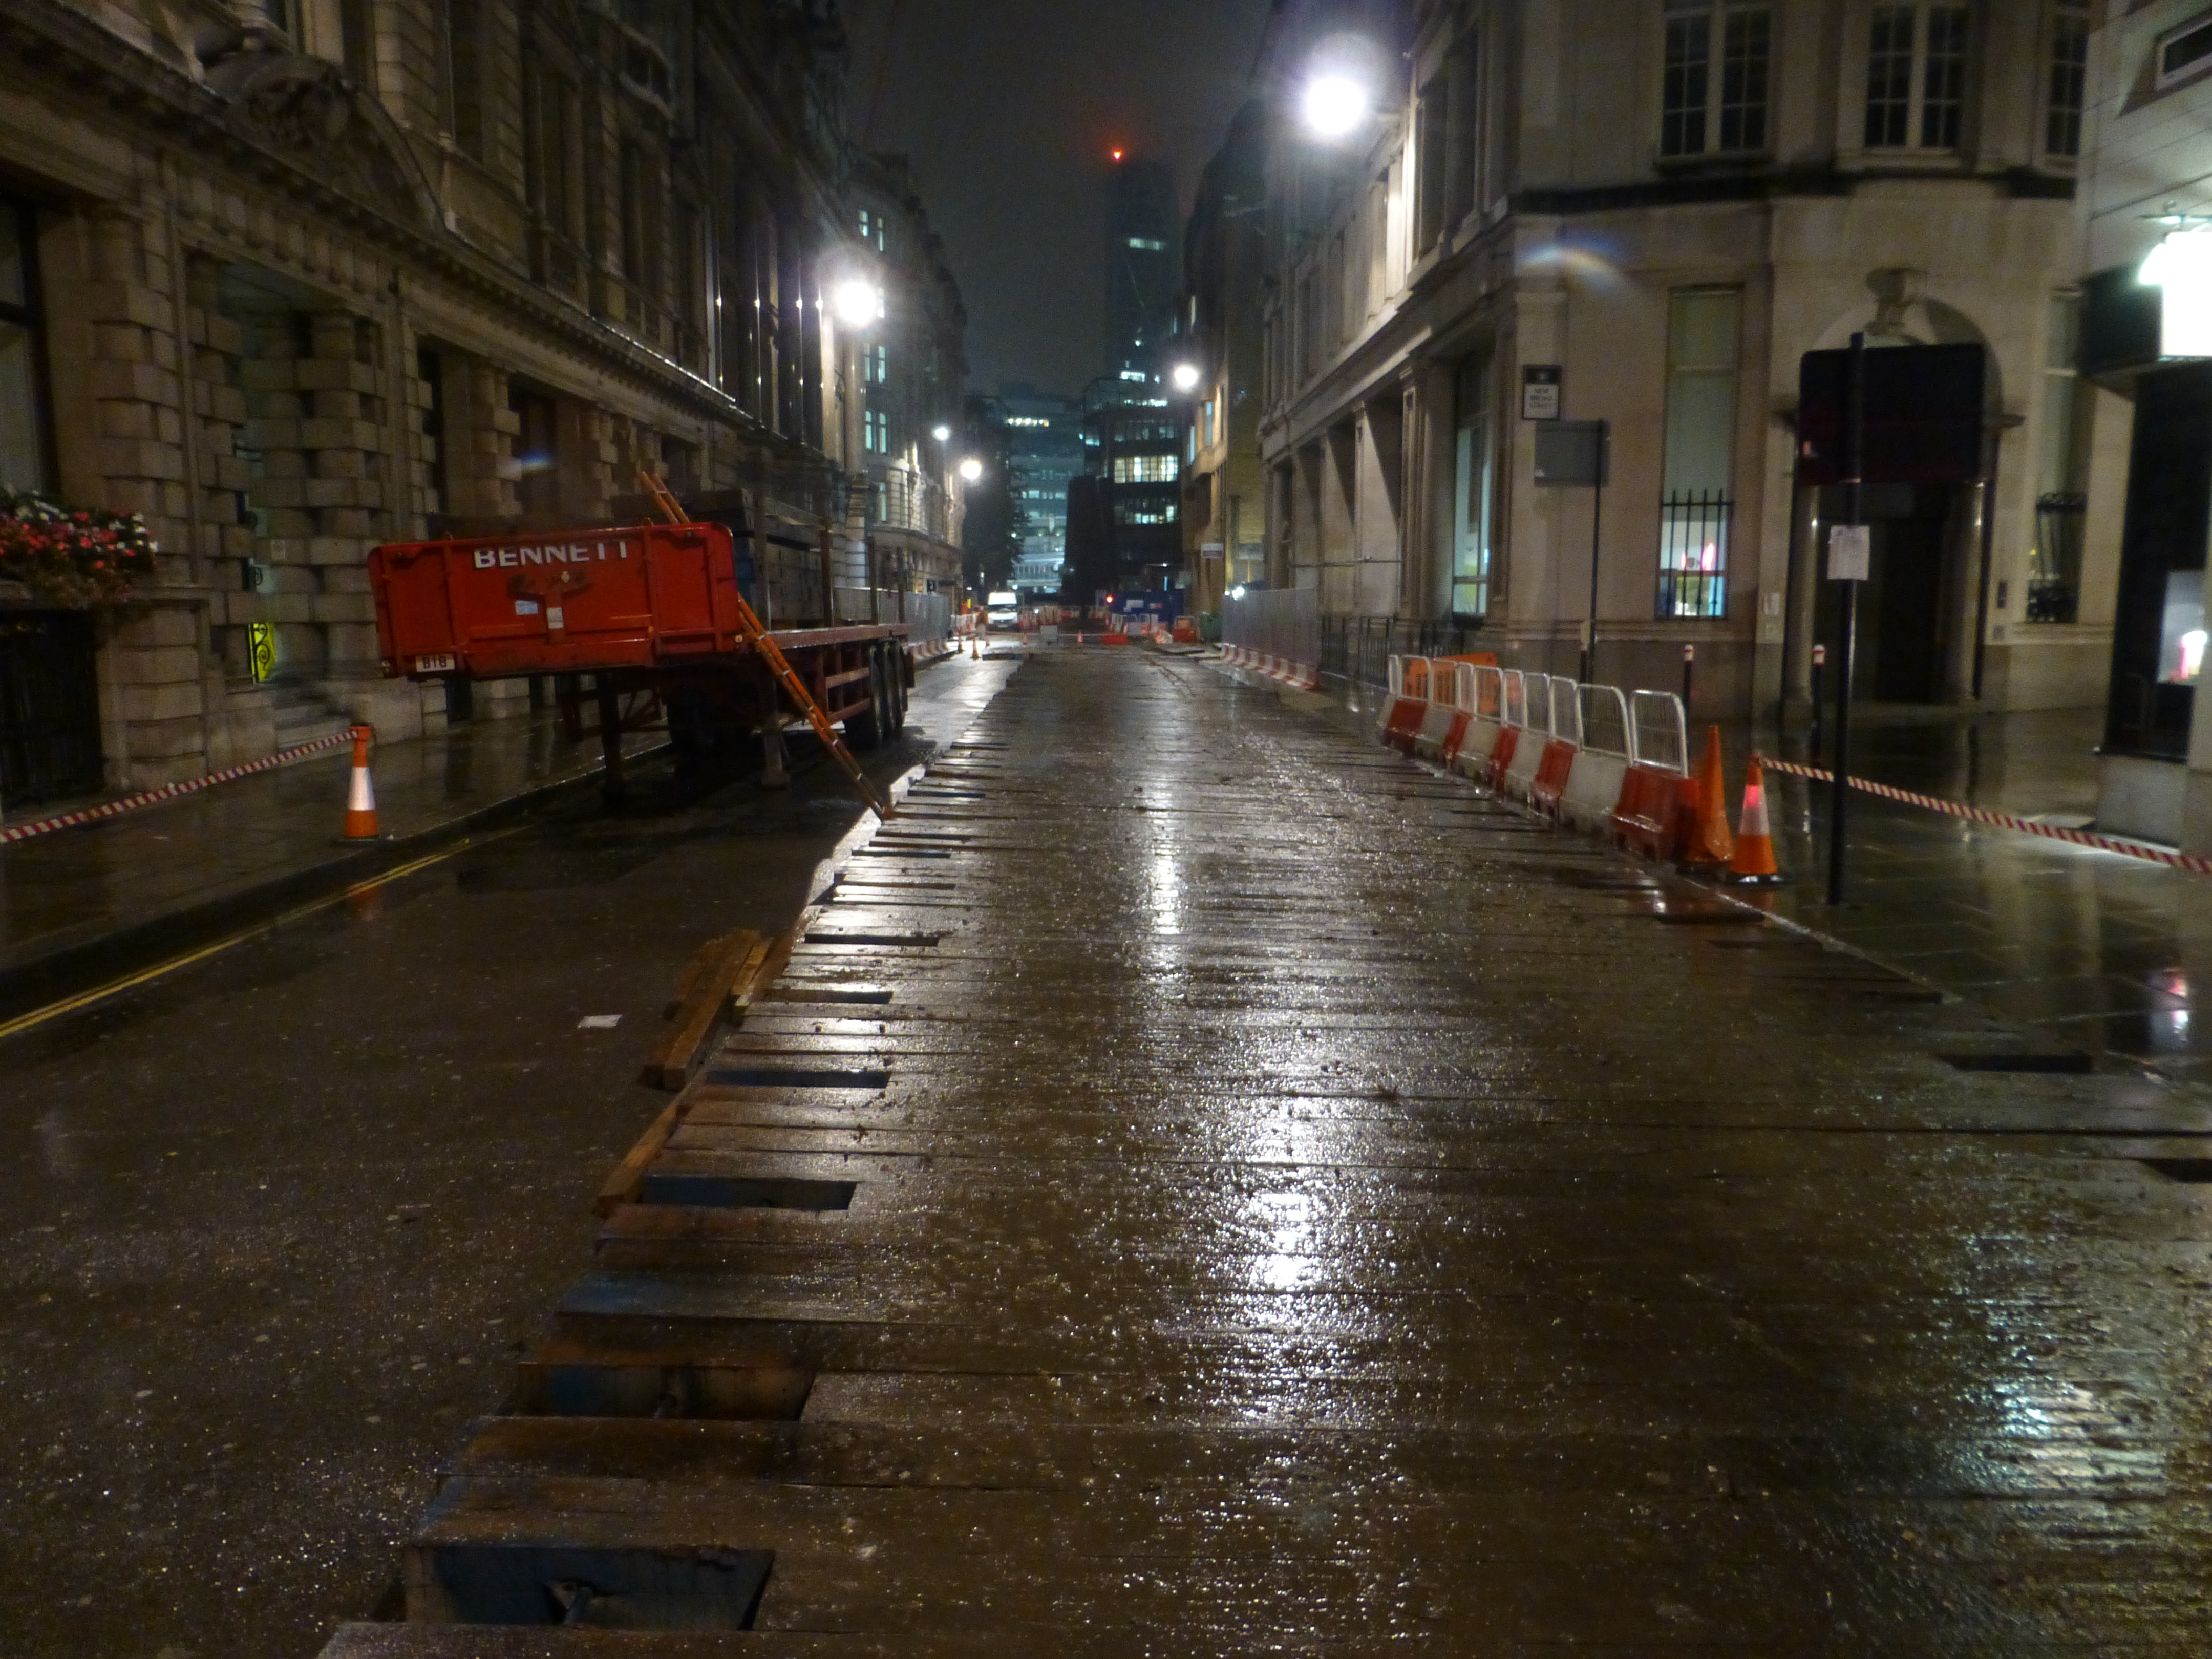 oak bog mats on wet street at night in the city centre